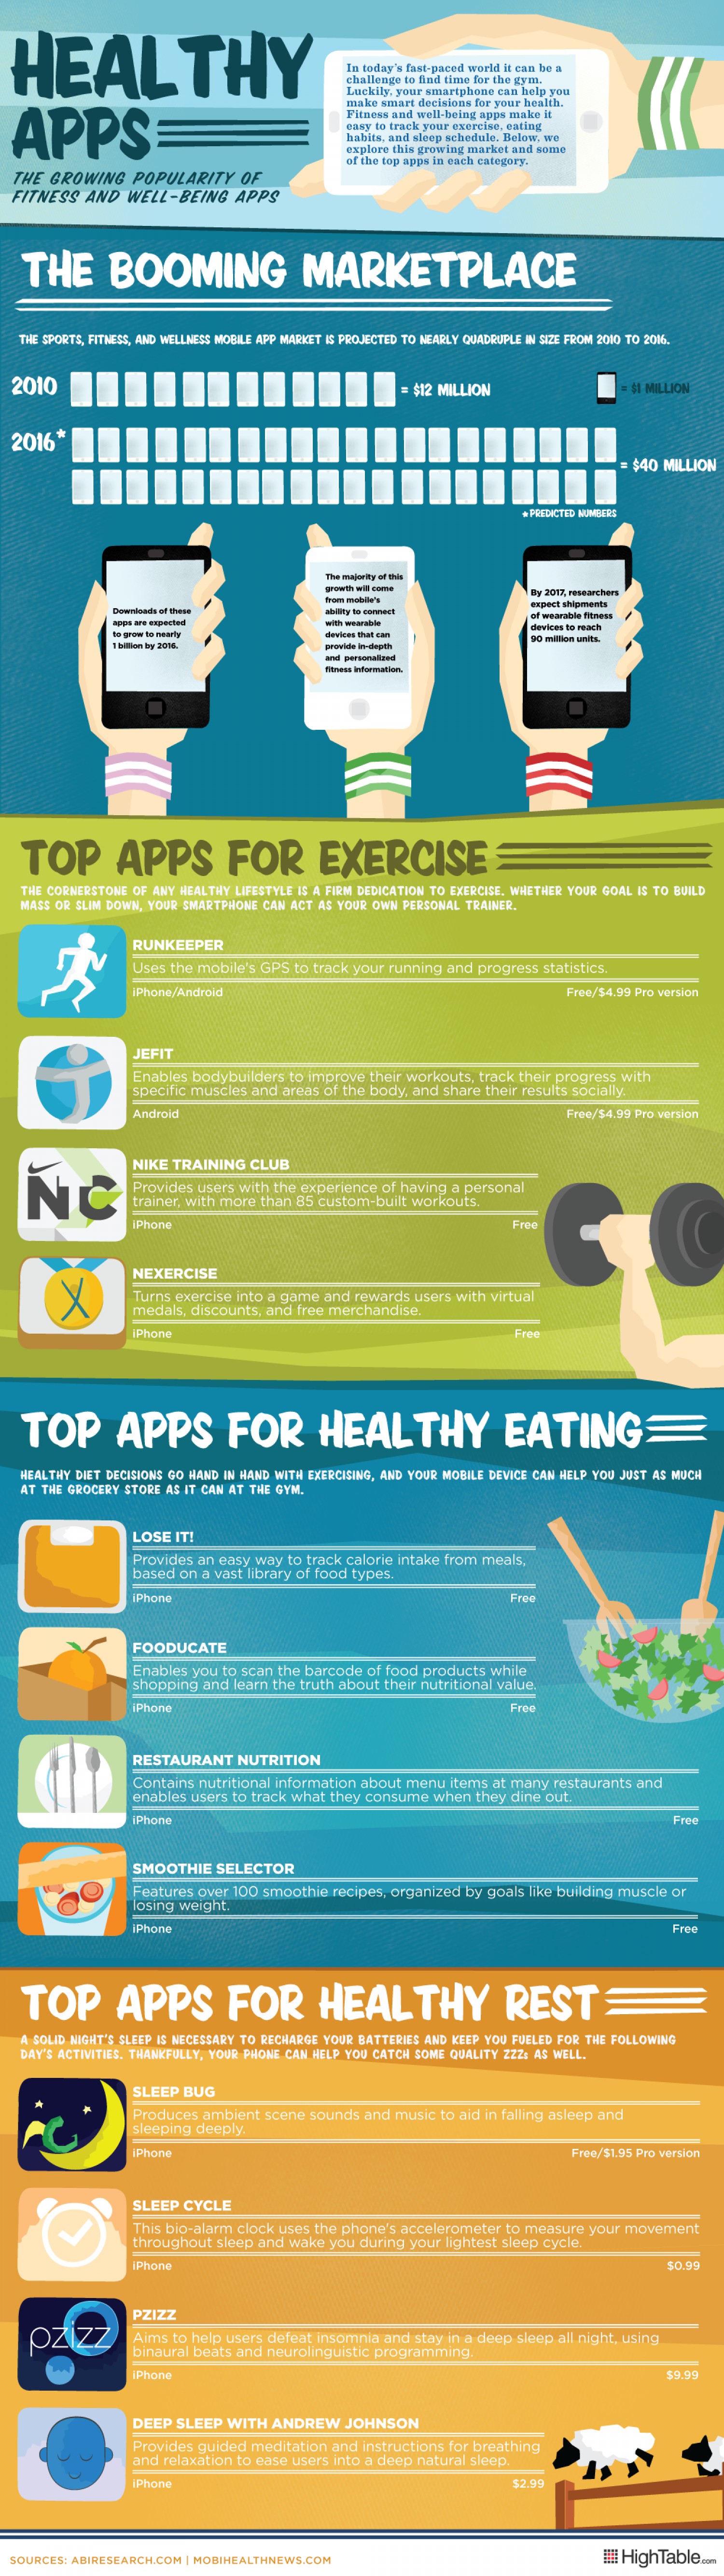 Healthy Apps